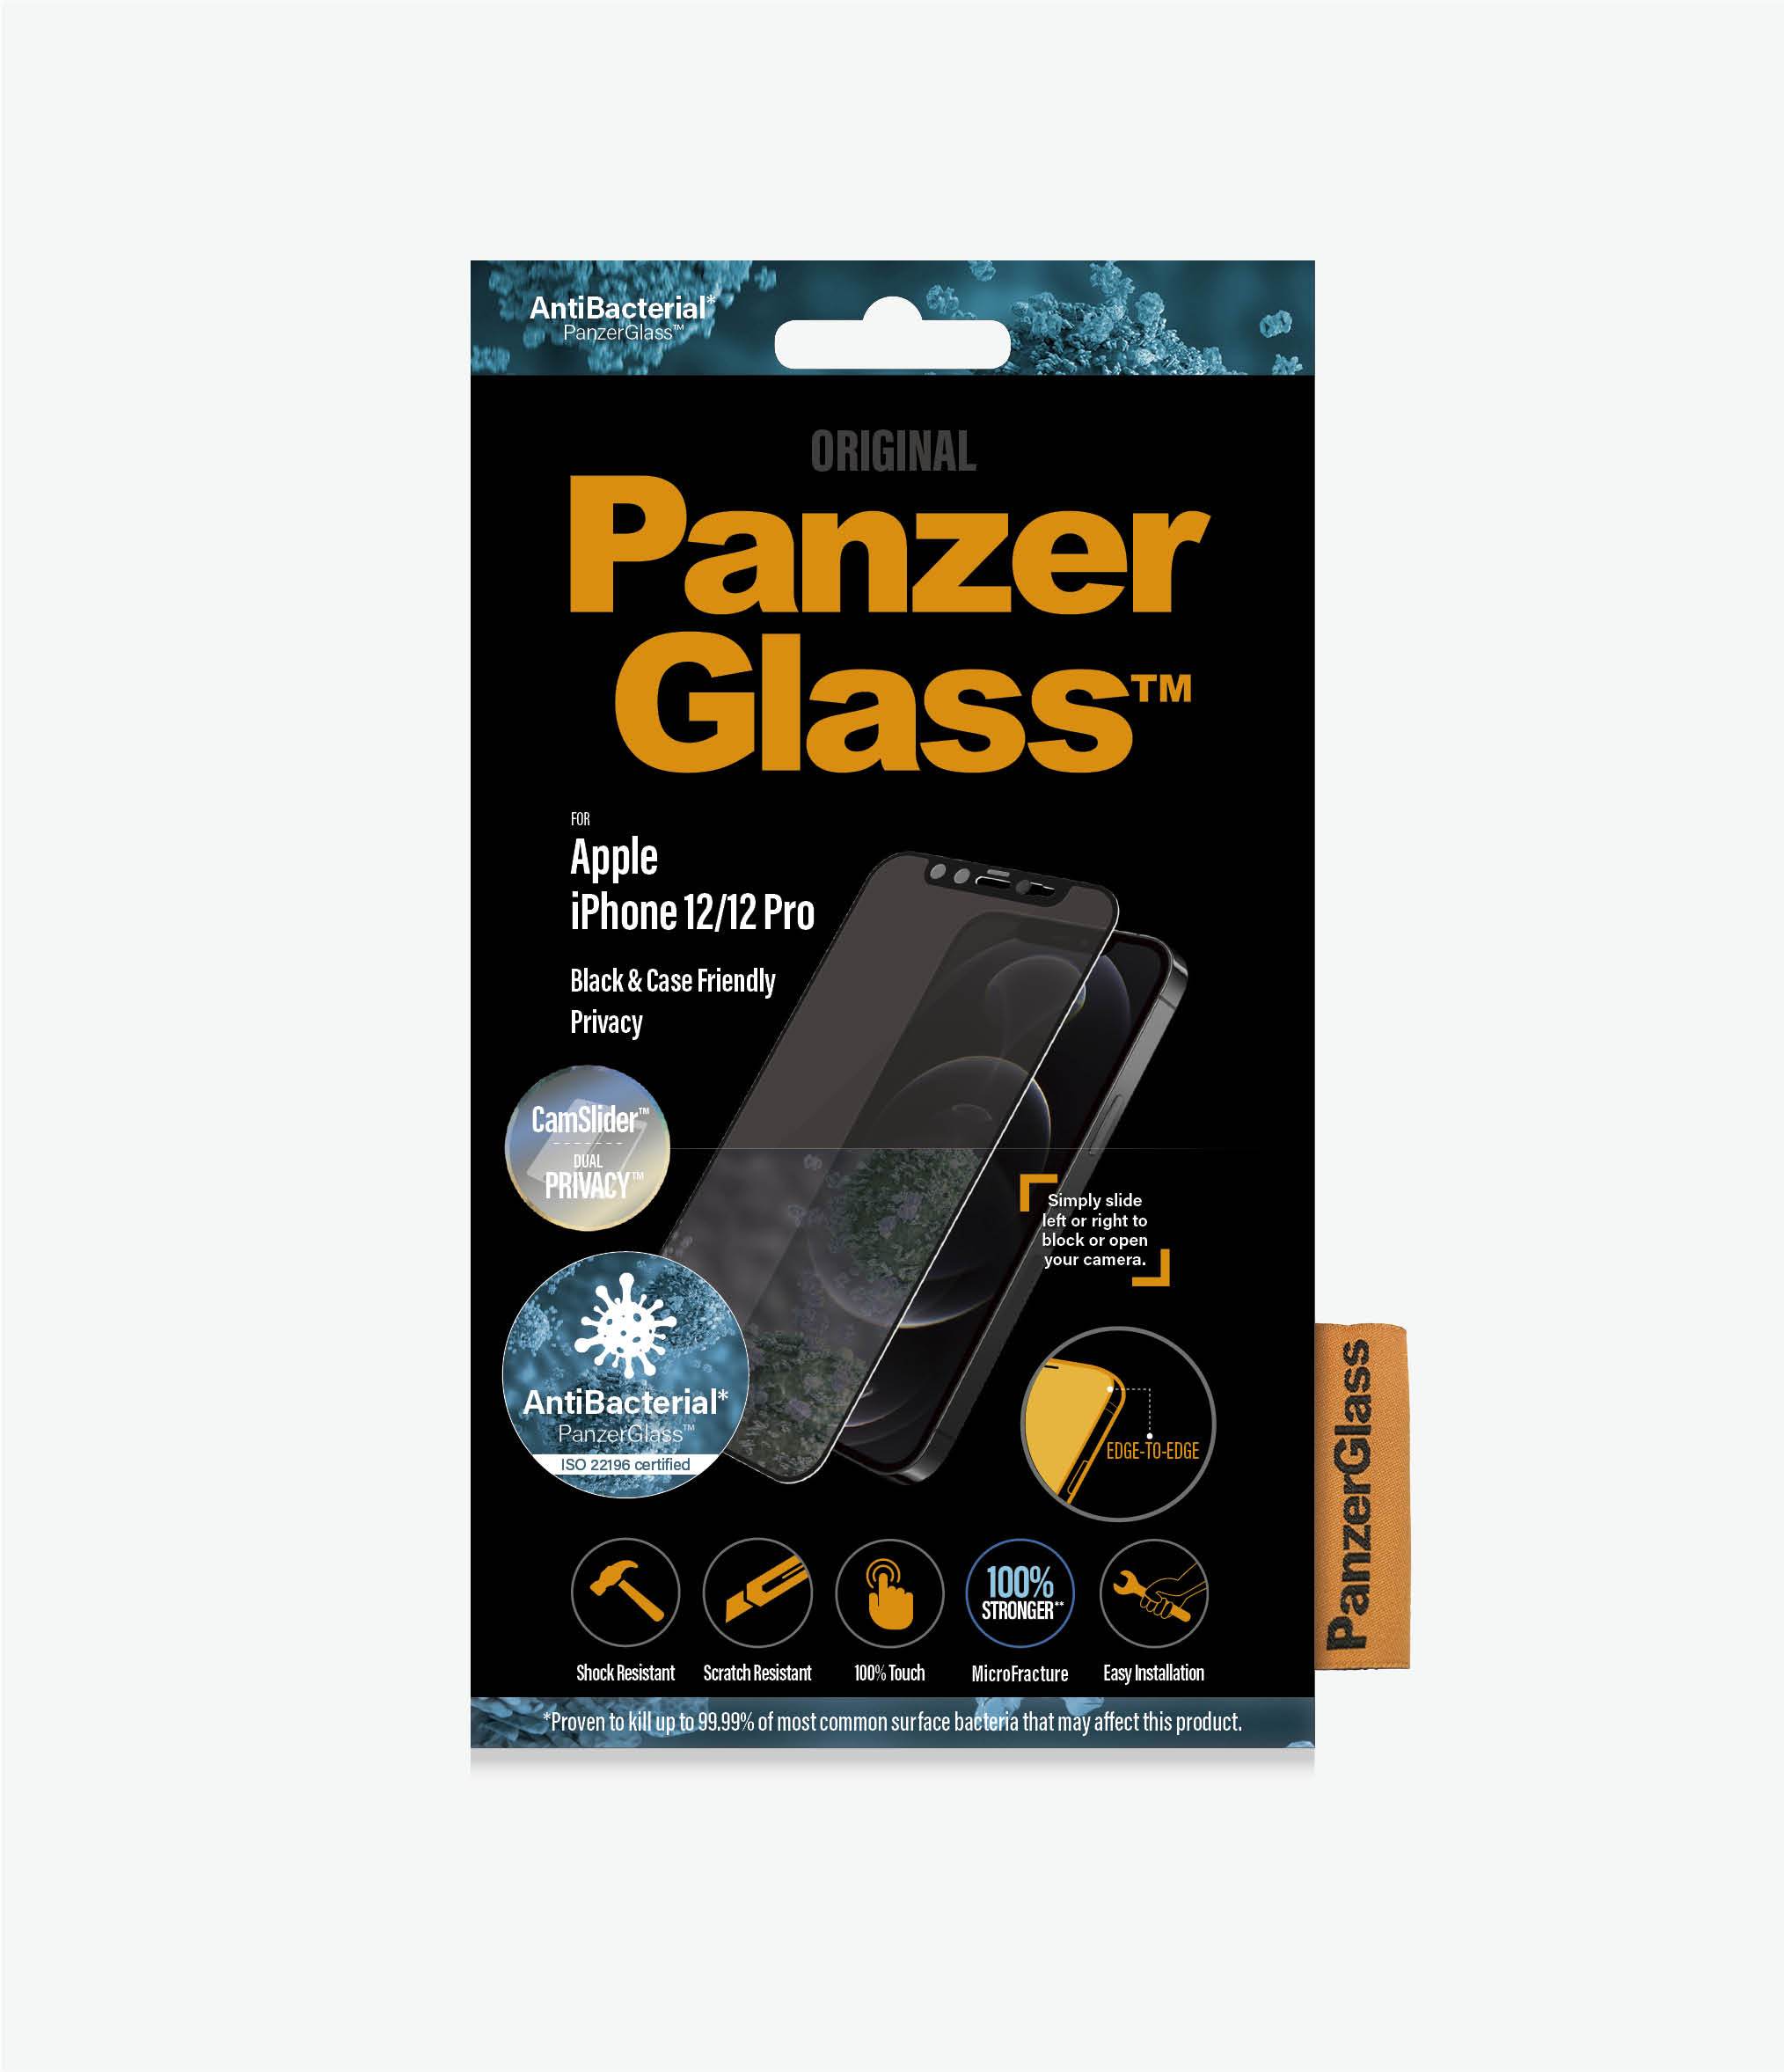 PanzerGlass™ Apple iPhone 12/12 Pro Black (P2714) - Dual Privacy™ - Screen Protector - Resistant to scratches, Shock absorbing, Crystal clear